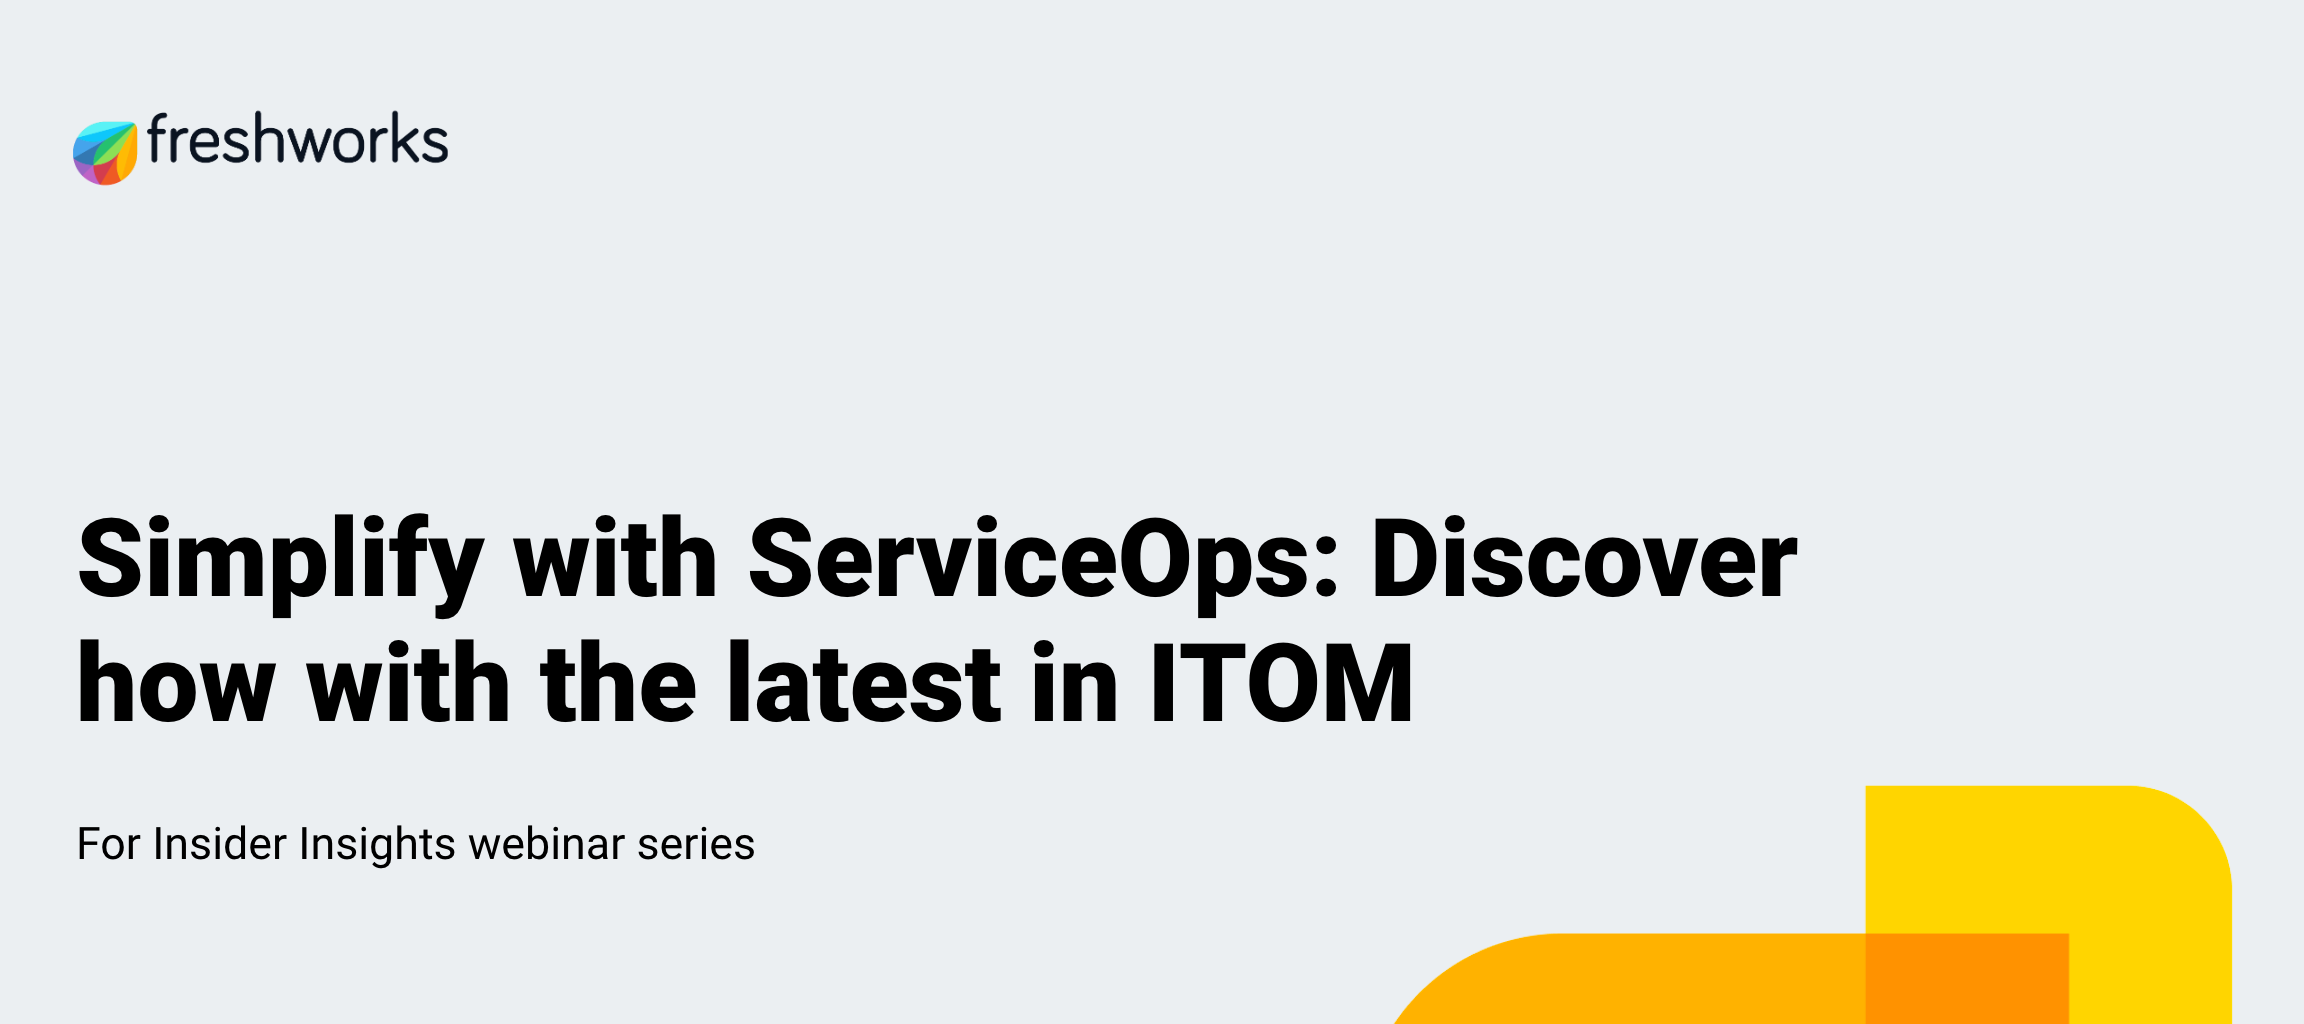 Simplify with ServiceOps: Discover how with the latest in ITOM